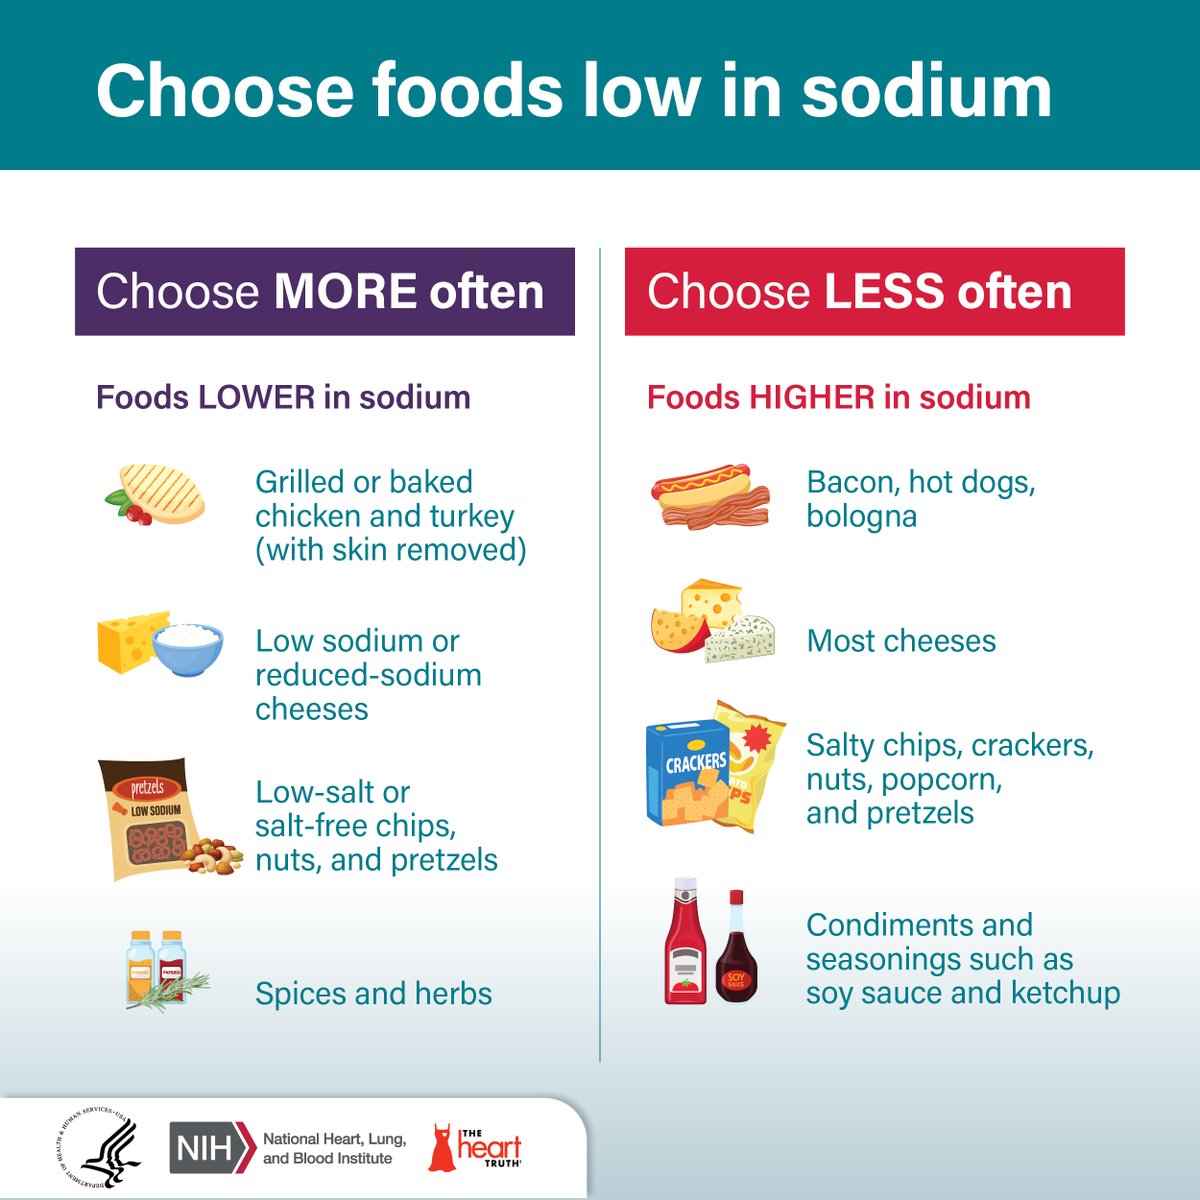 May is #HighBloodPressureMonth! Choosing and preparing foods that are lower in salt and sodium may help prevent or lower high blood pressure. Food labels can help you decide which foods to choose. Find tips on choosing low-sodium foods: nhlbi.nih.gov/resources/choo… #HealthierNJ